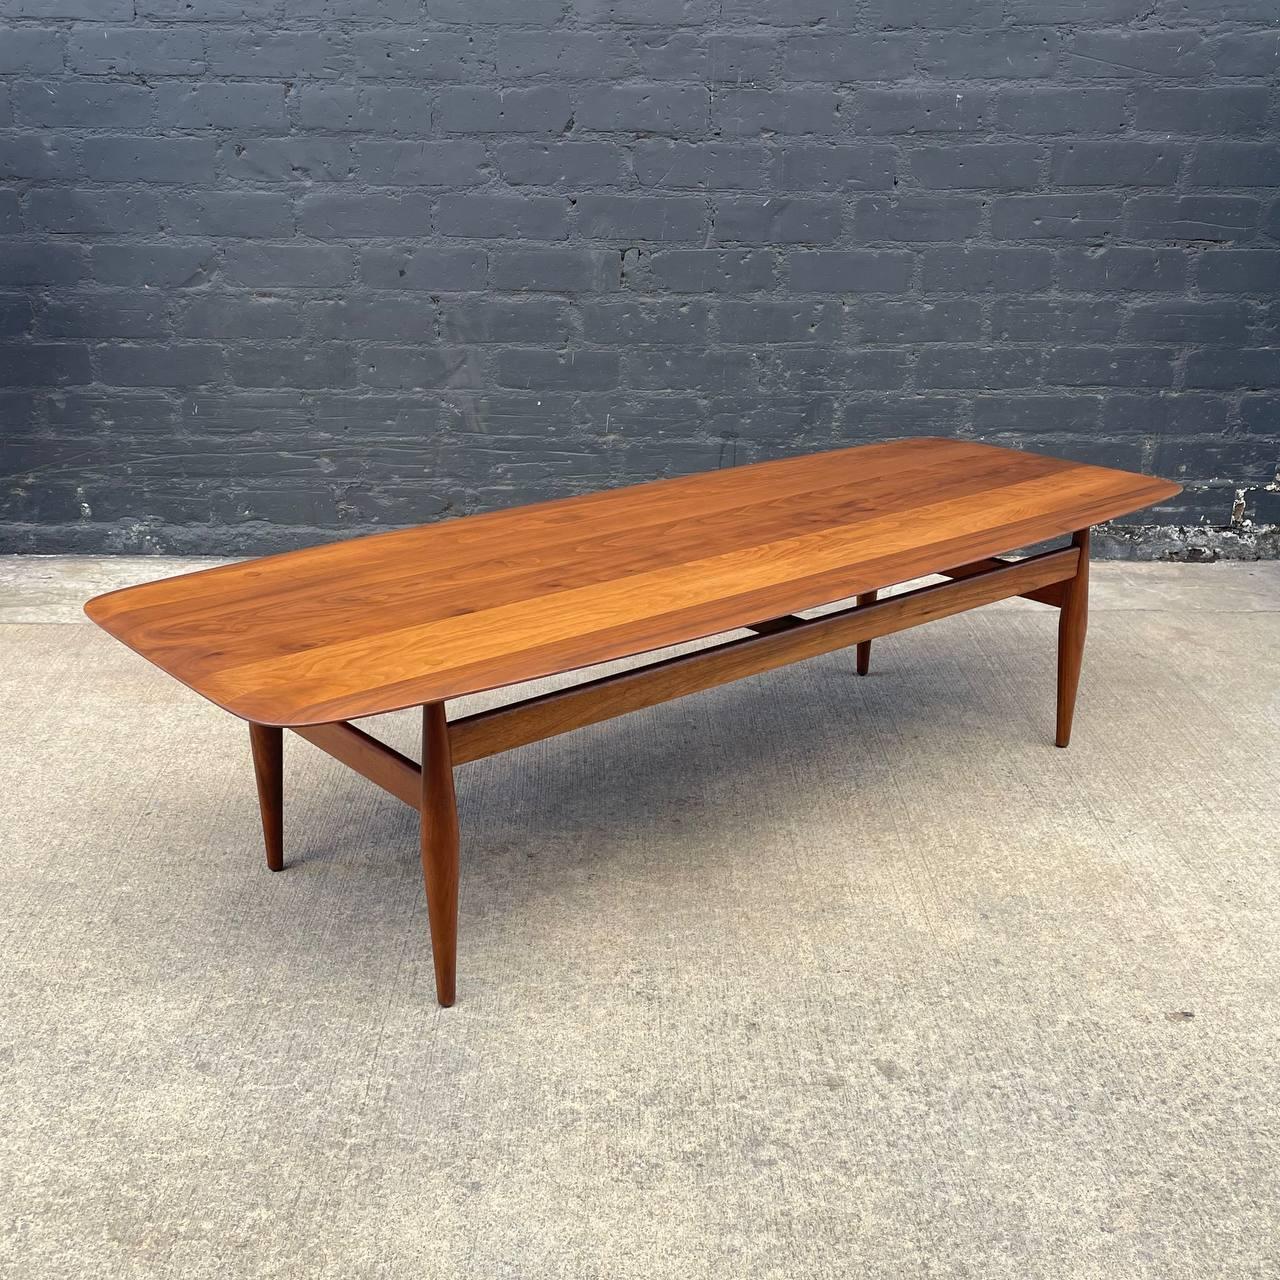 Newly Refinished Mid-Century Modern Walnut Coffee Table John Keal, Brown Saltman

Year: c.1950’s

With over 15 years of experience, our workshop has followed a careful process of restoration, showcasing our passion and creativity for vintage designs